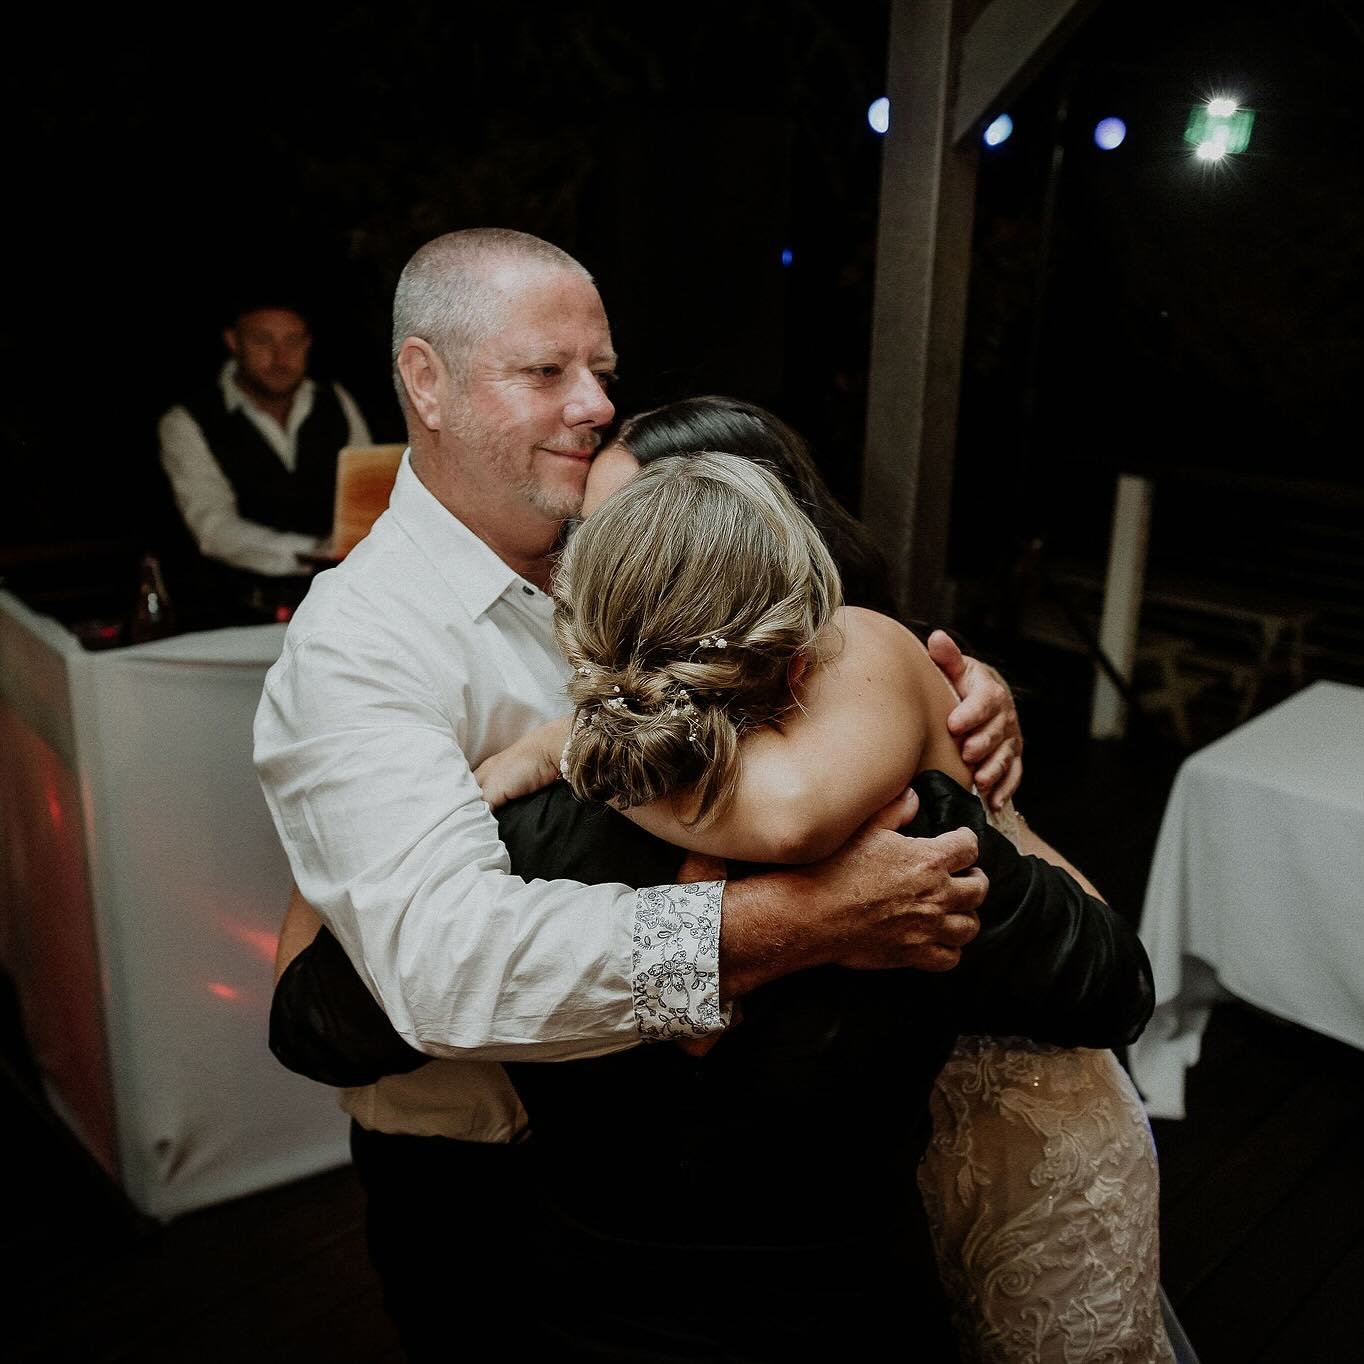 Creating the best moments on the dance floor for couples and their guests. 

📸 capturing these special moments @benandebony